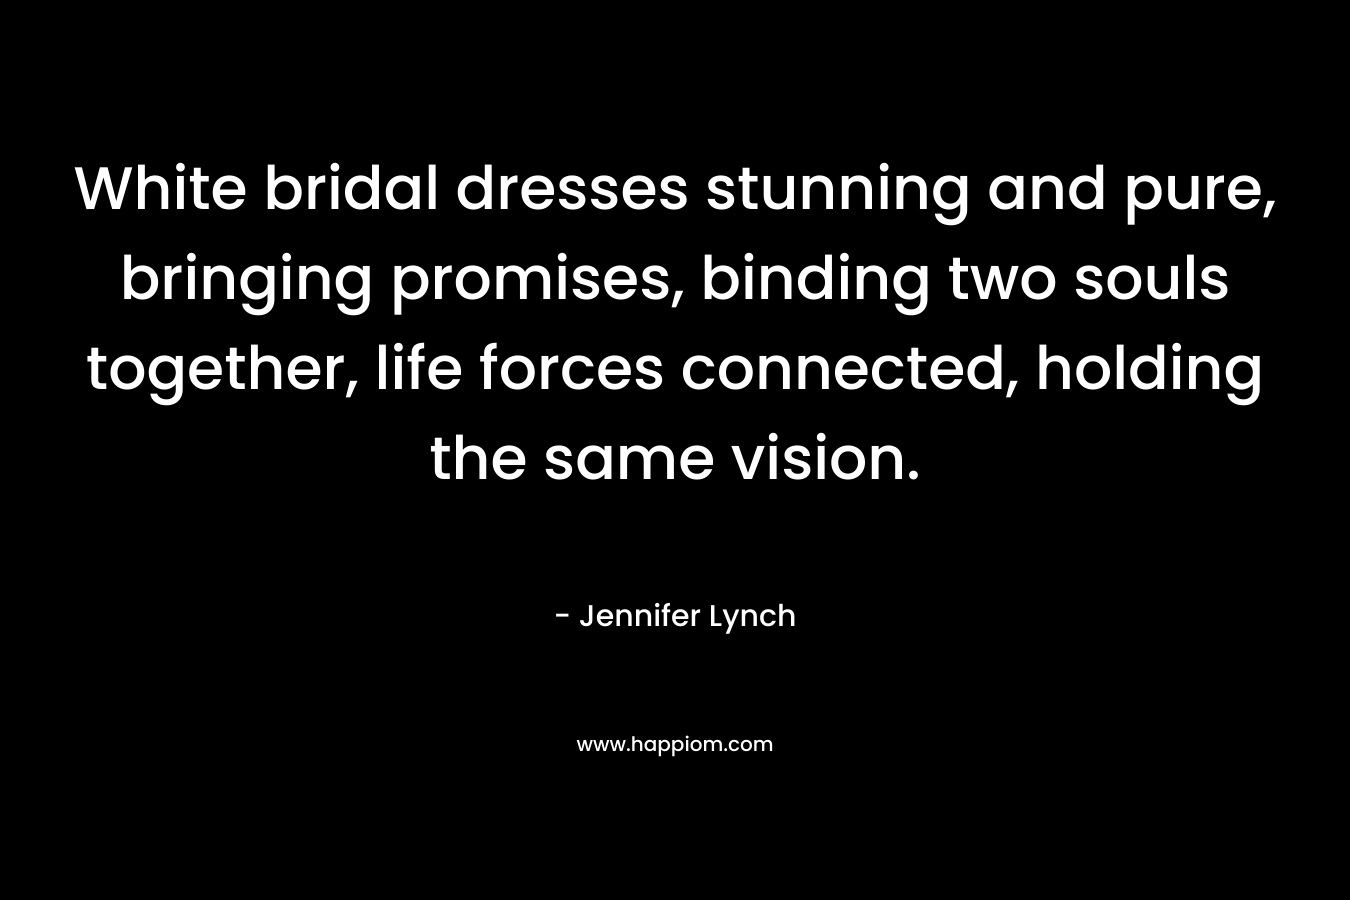 White bridal dresses stunning and pure, bringing promises, binding two souls together, life forces connected, holding the same vision. – Jennifer Lynch